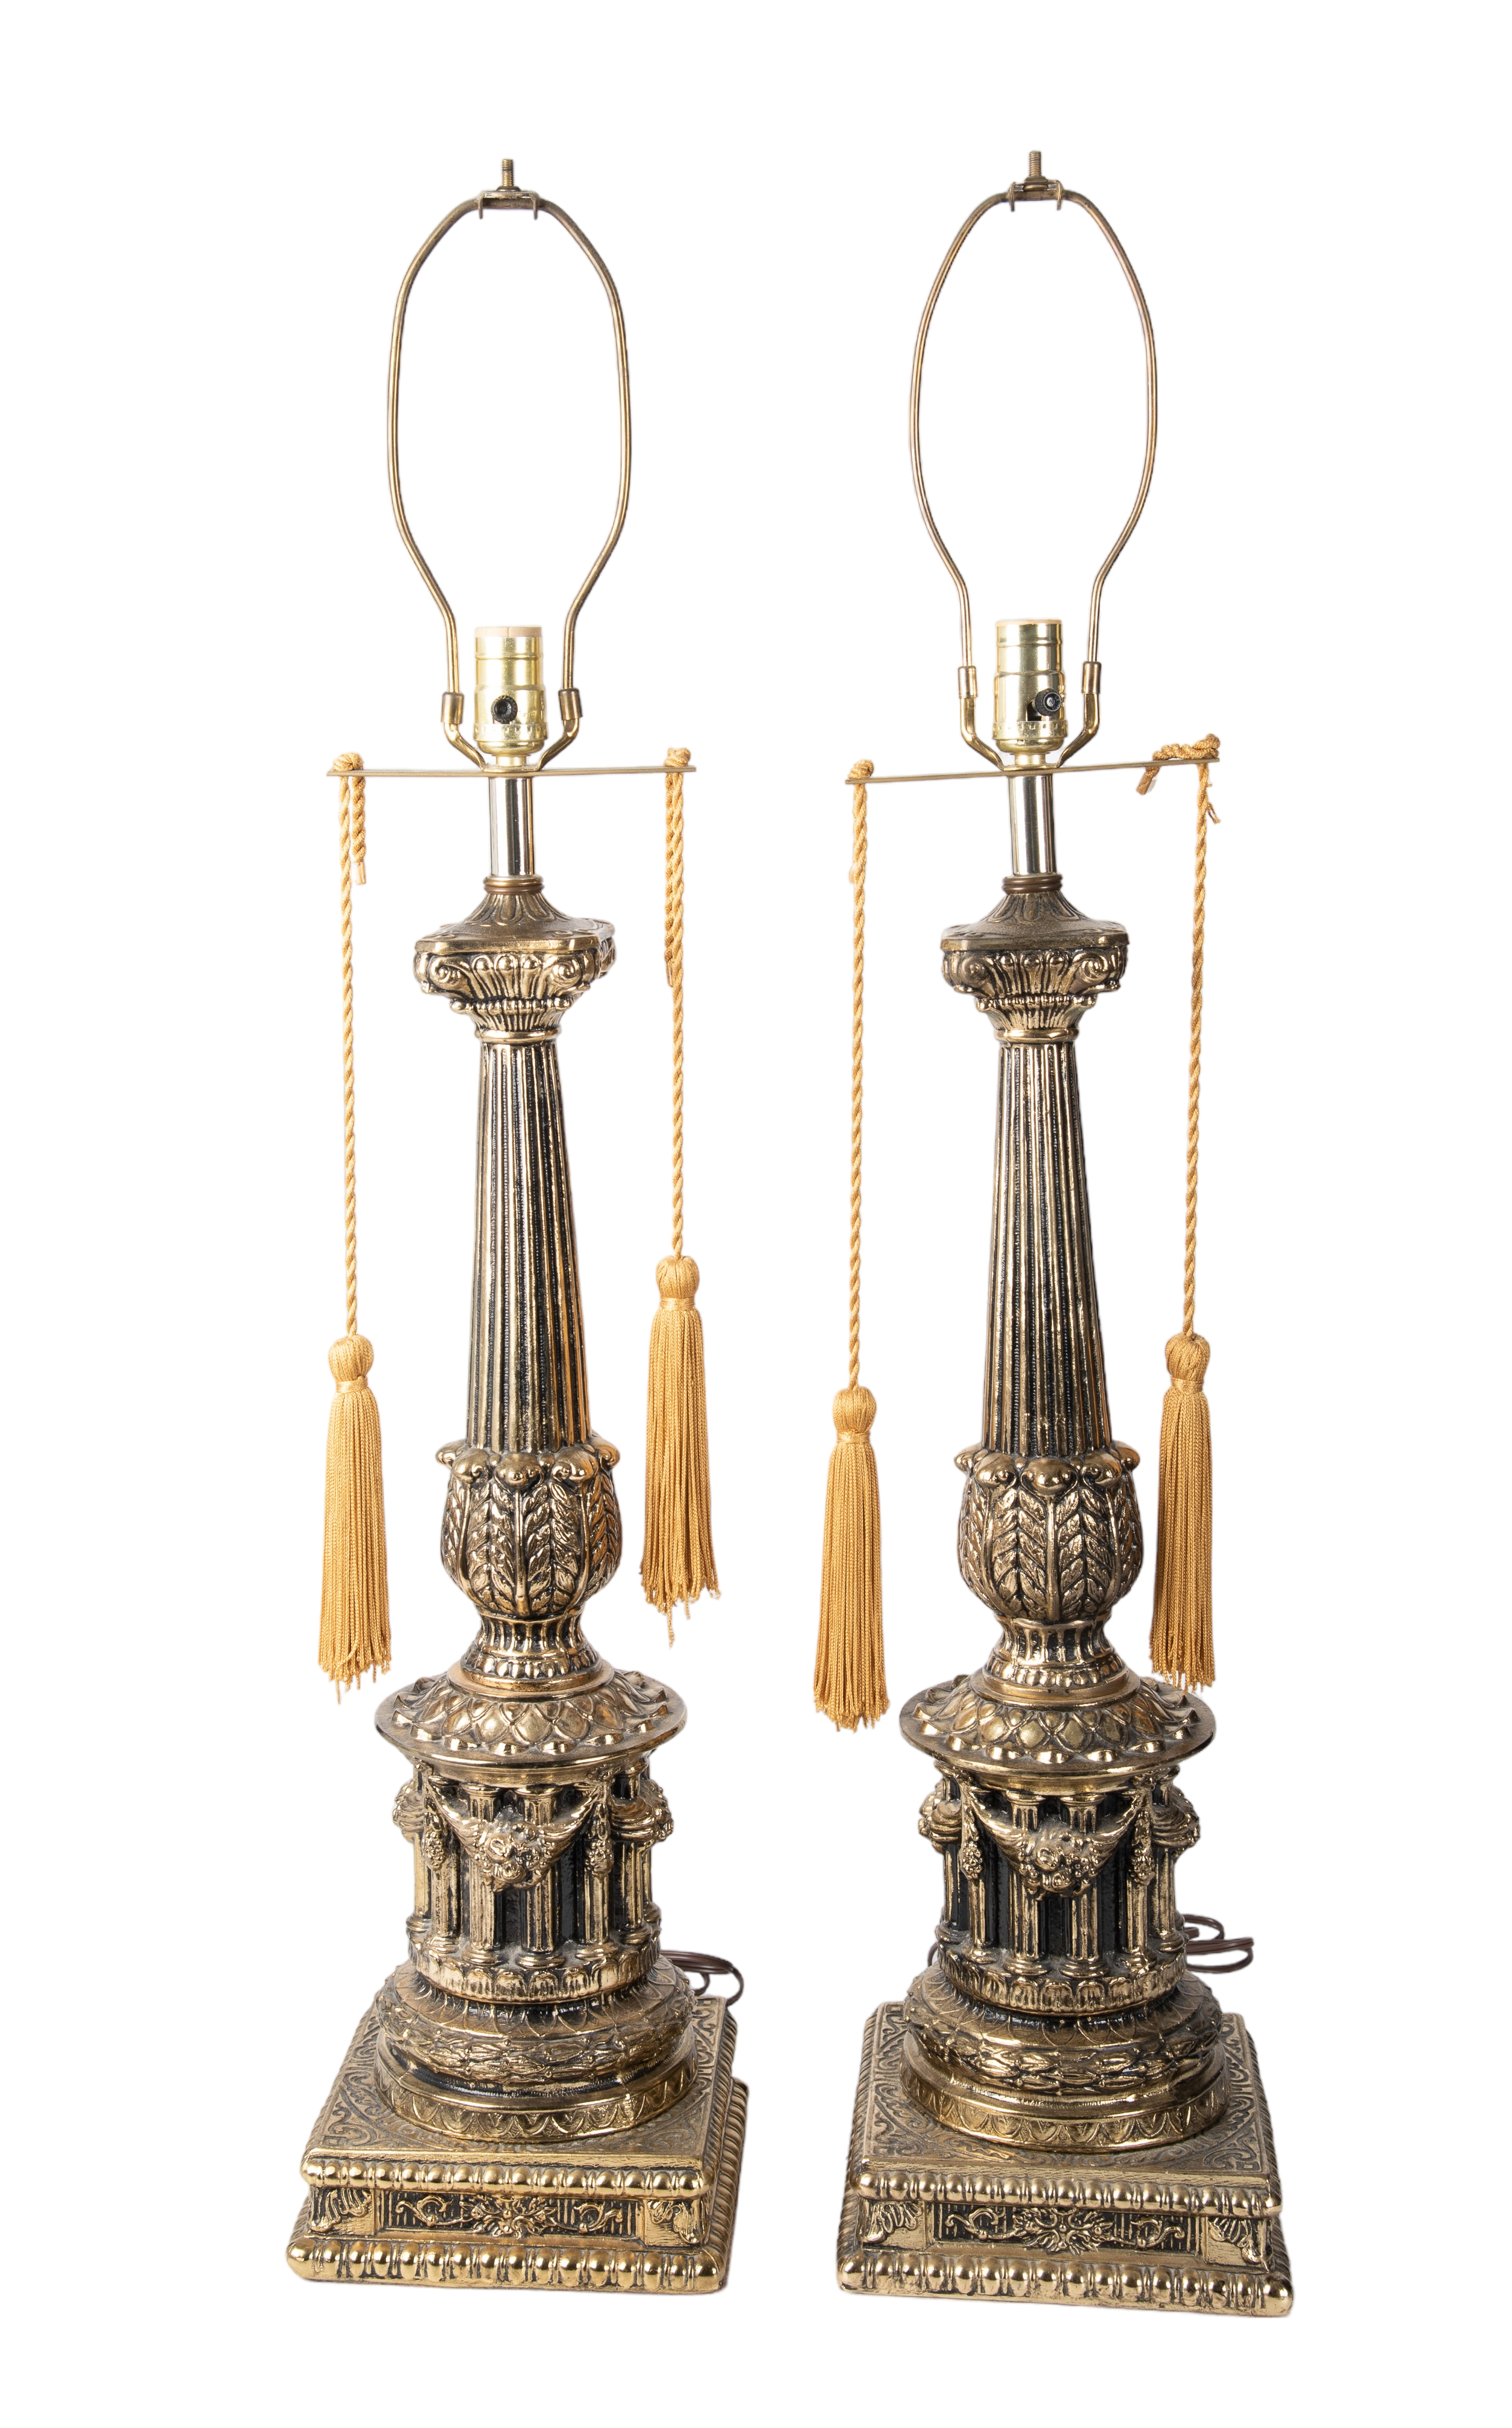 Pair of Louis XVI style table lamps,